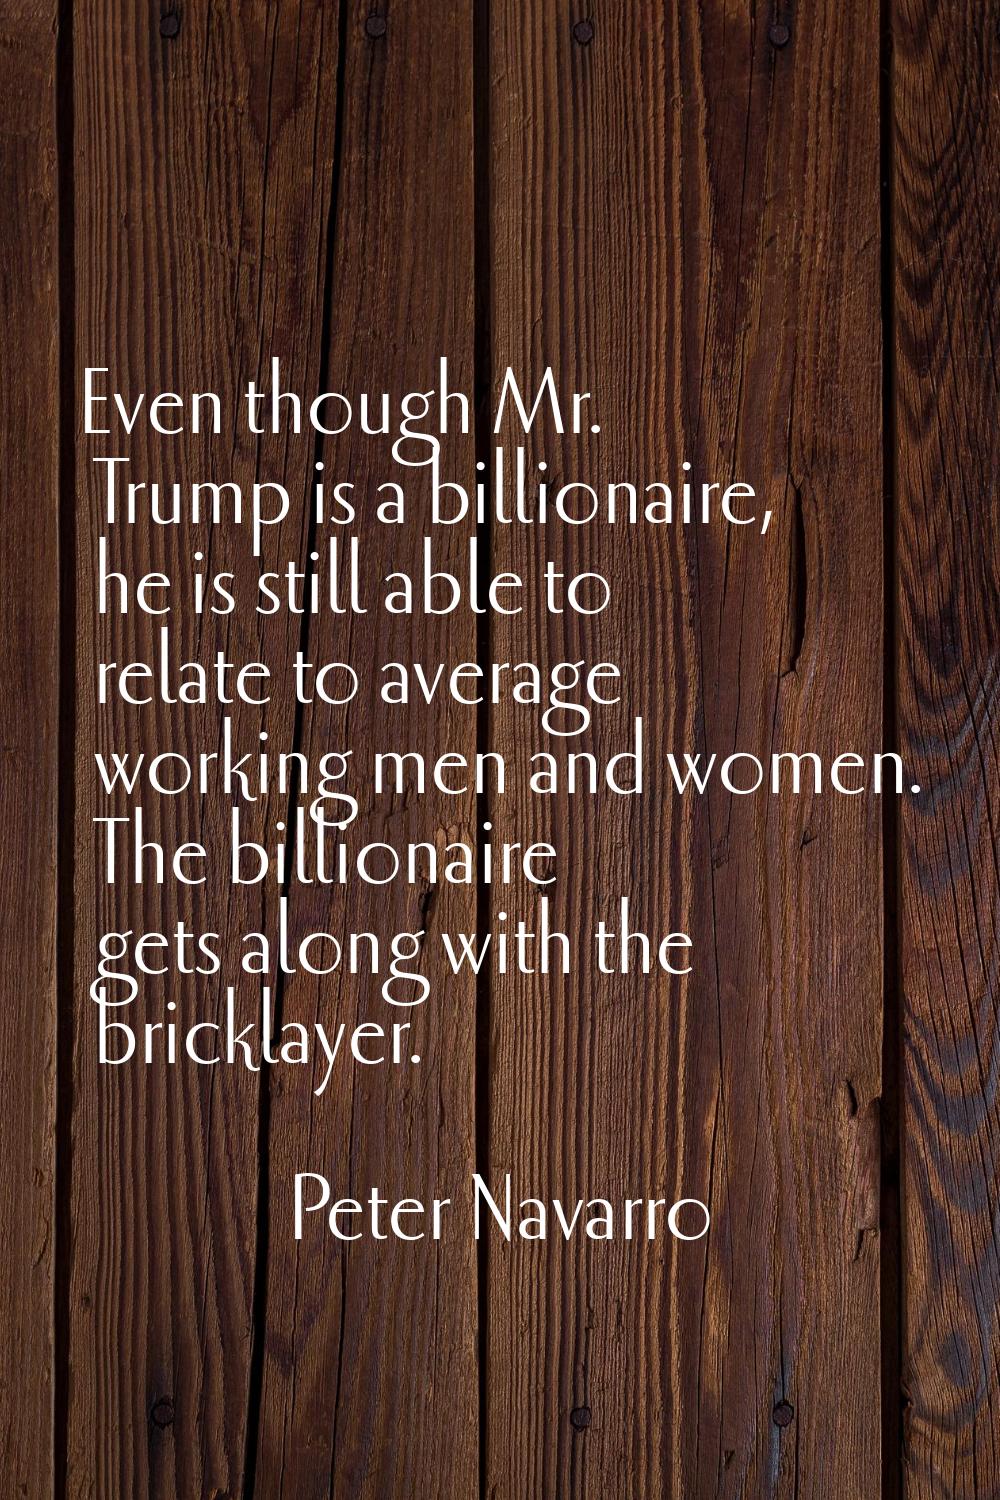 Even though Mr. Trump is a billionaire, he is still able to relate to average working men and women